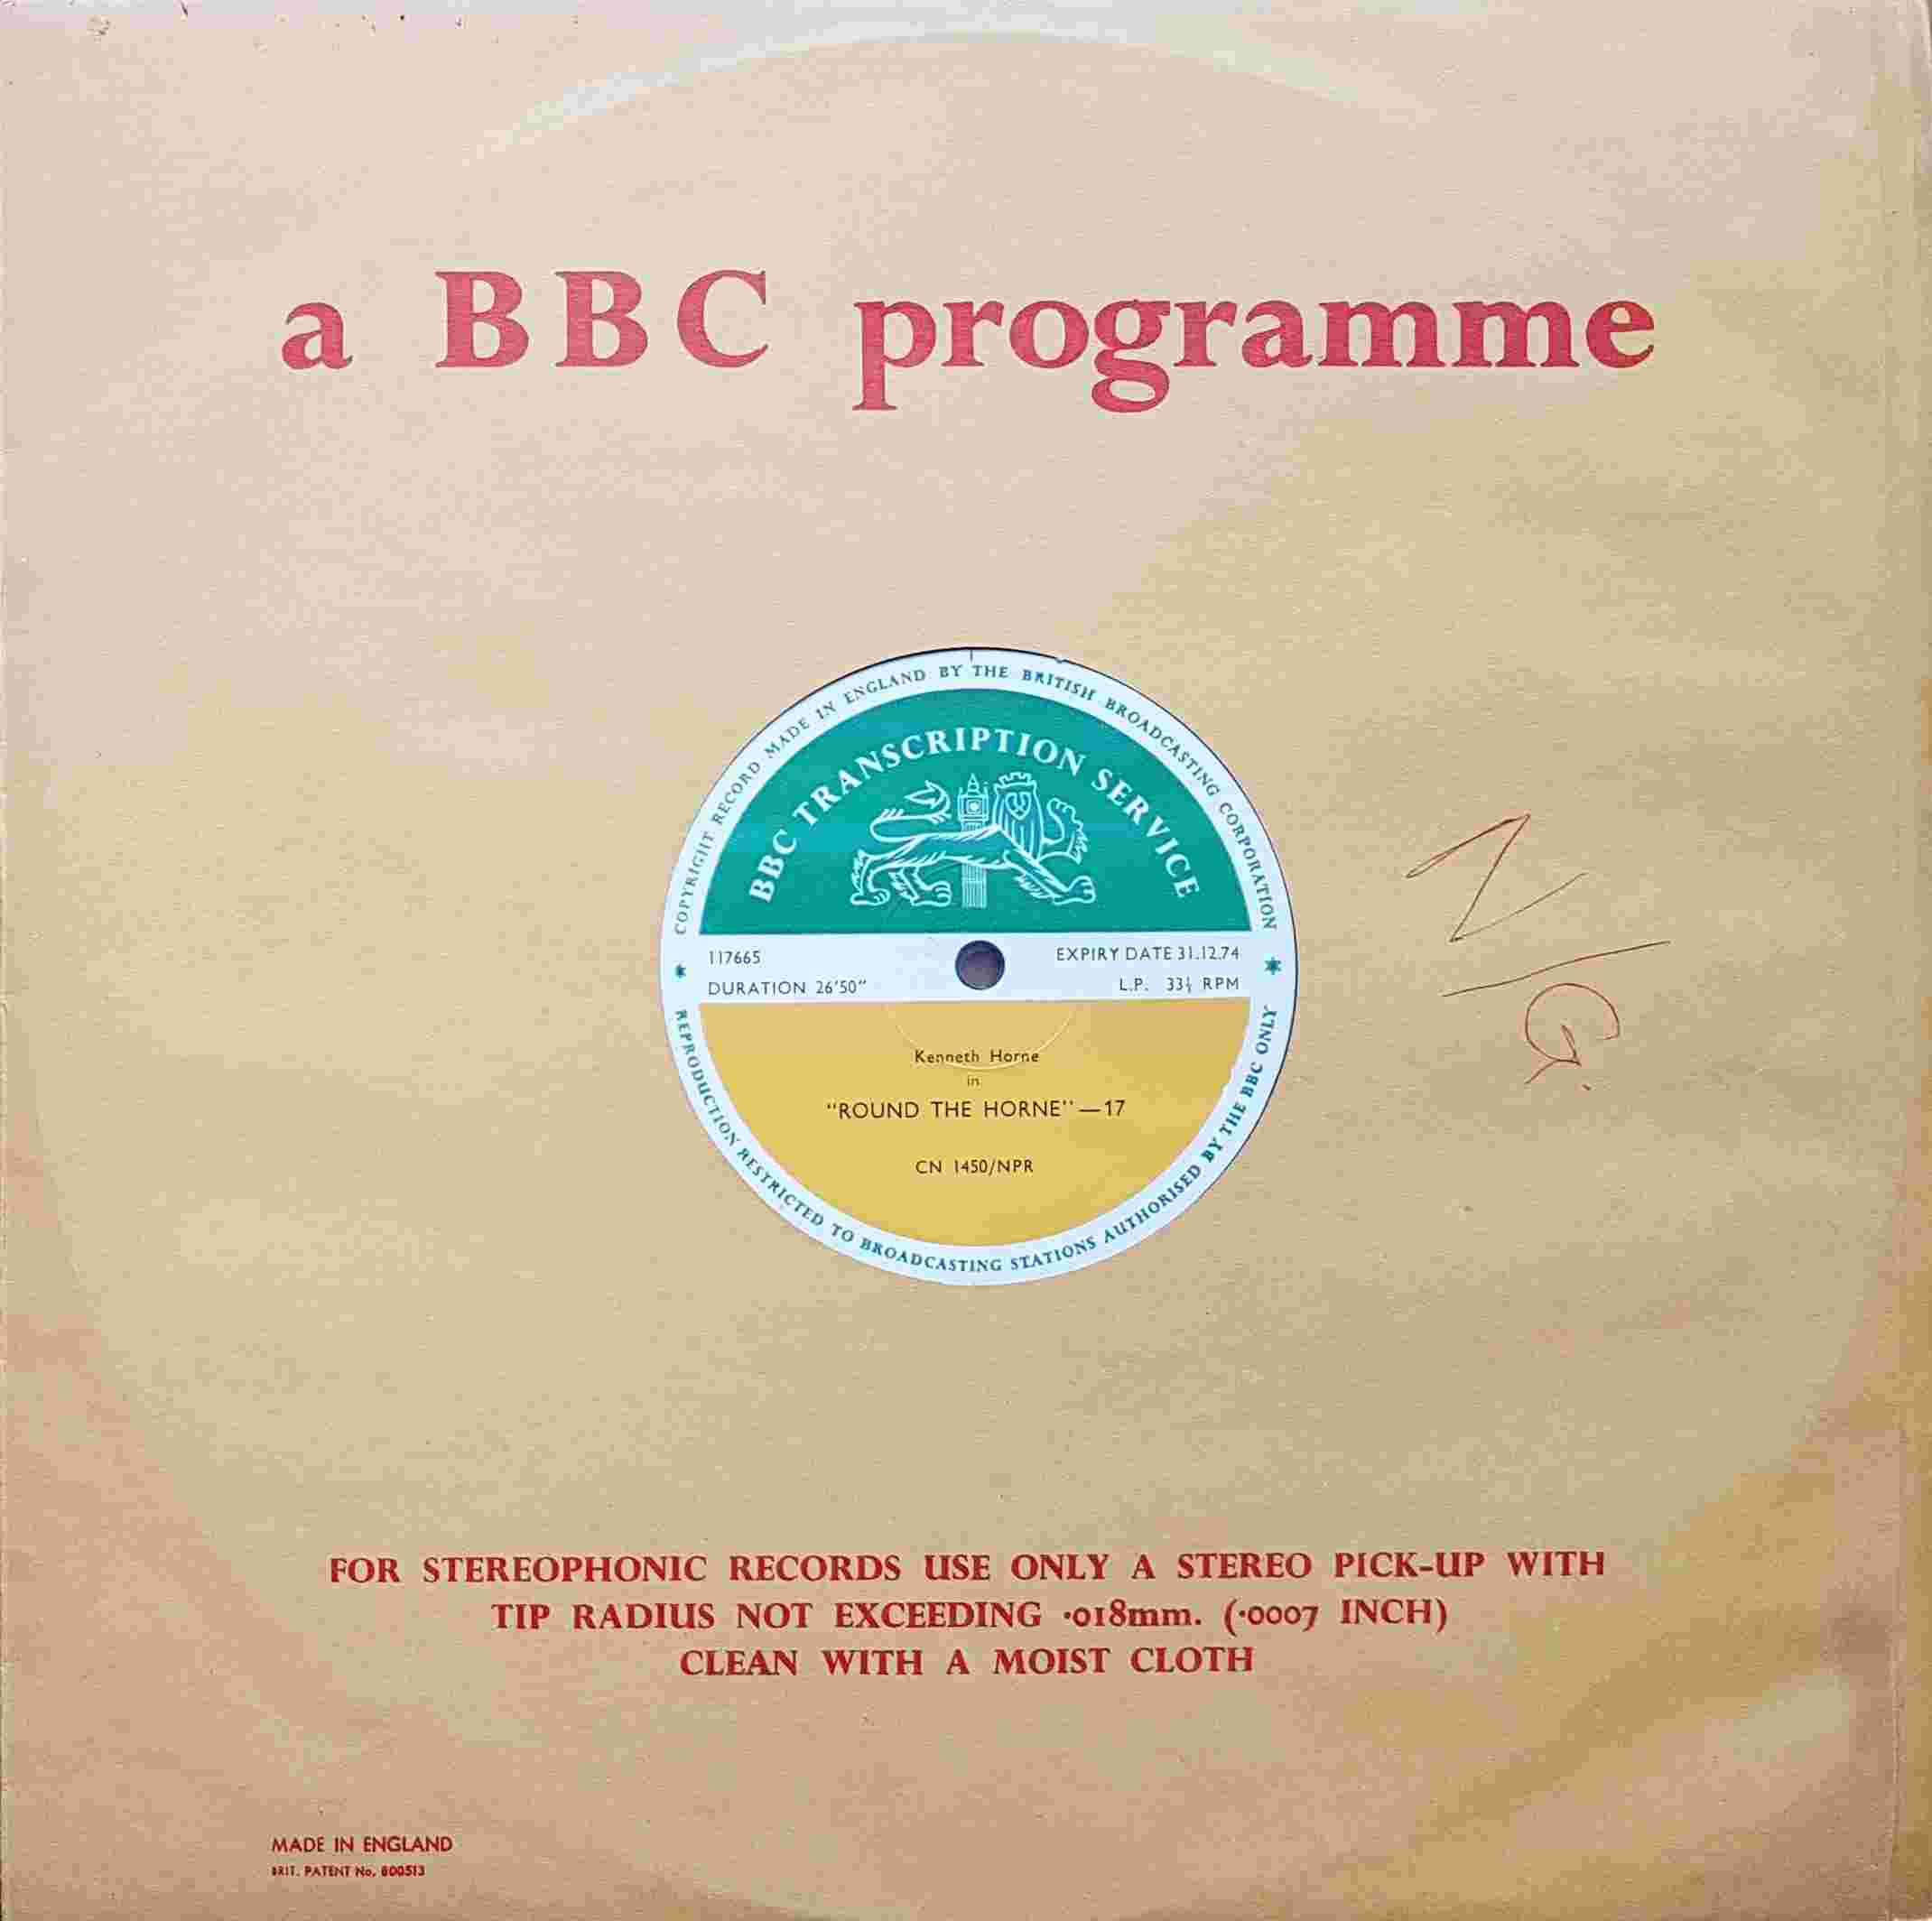 Picture of CN 1450 NPR 9 Round the Horne - 17 & 18 by artist Kenneth Horne from the BBC albums - Records and Tapes library